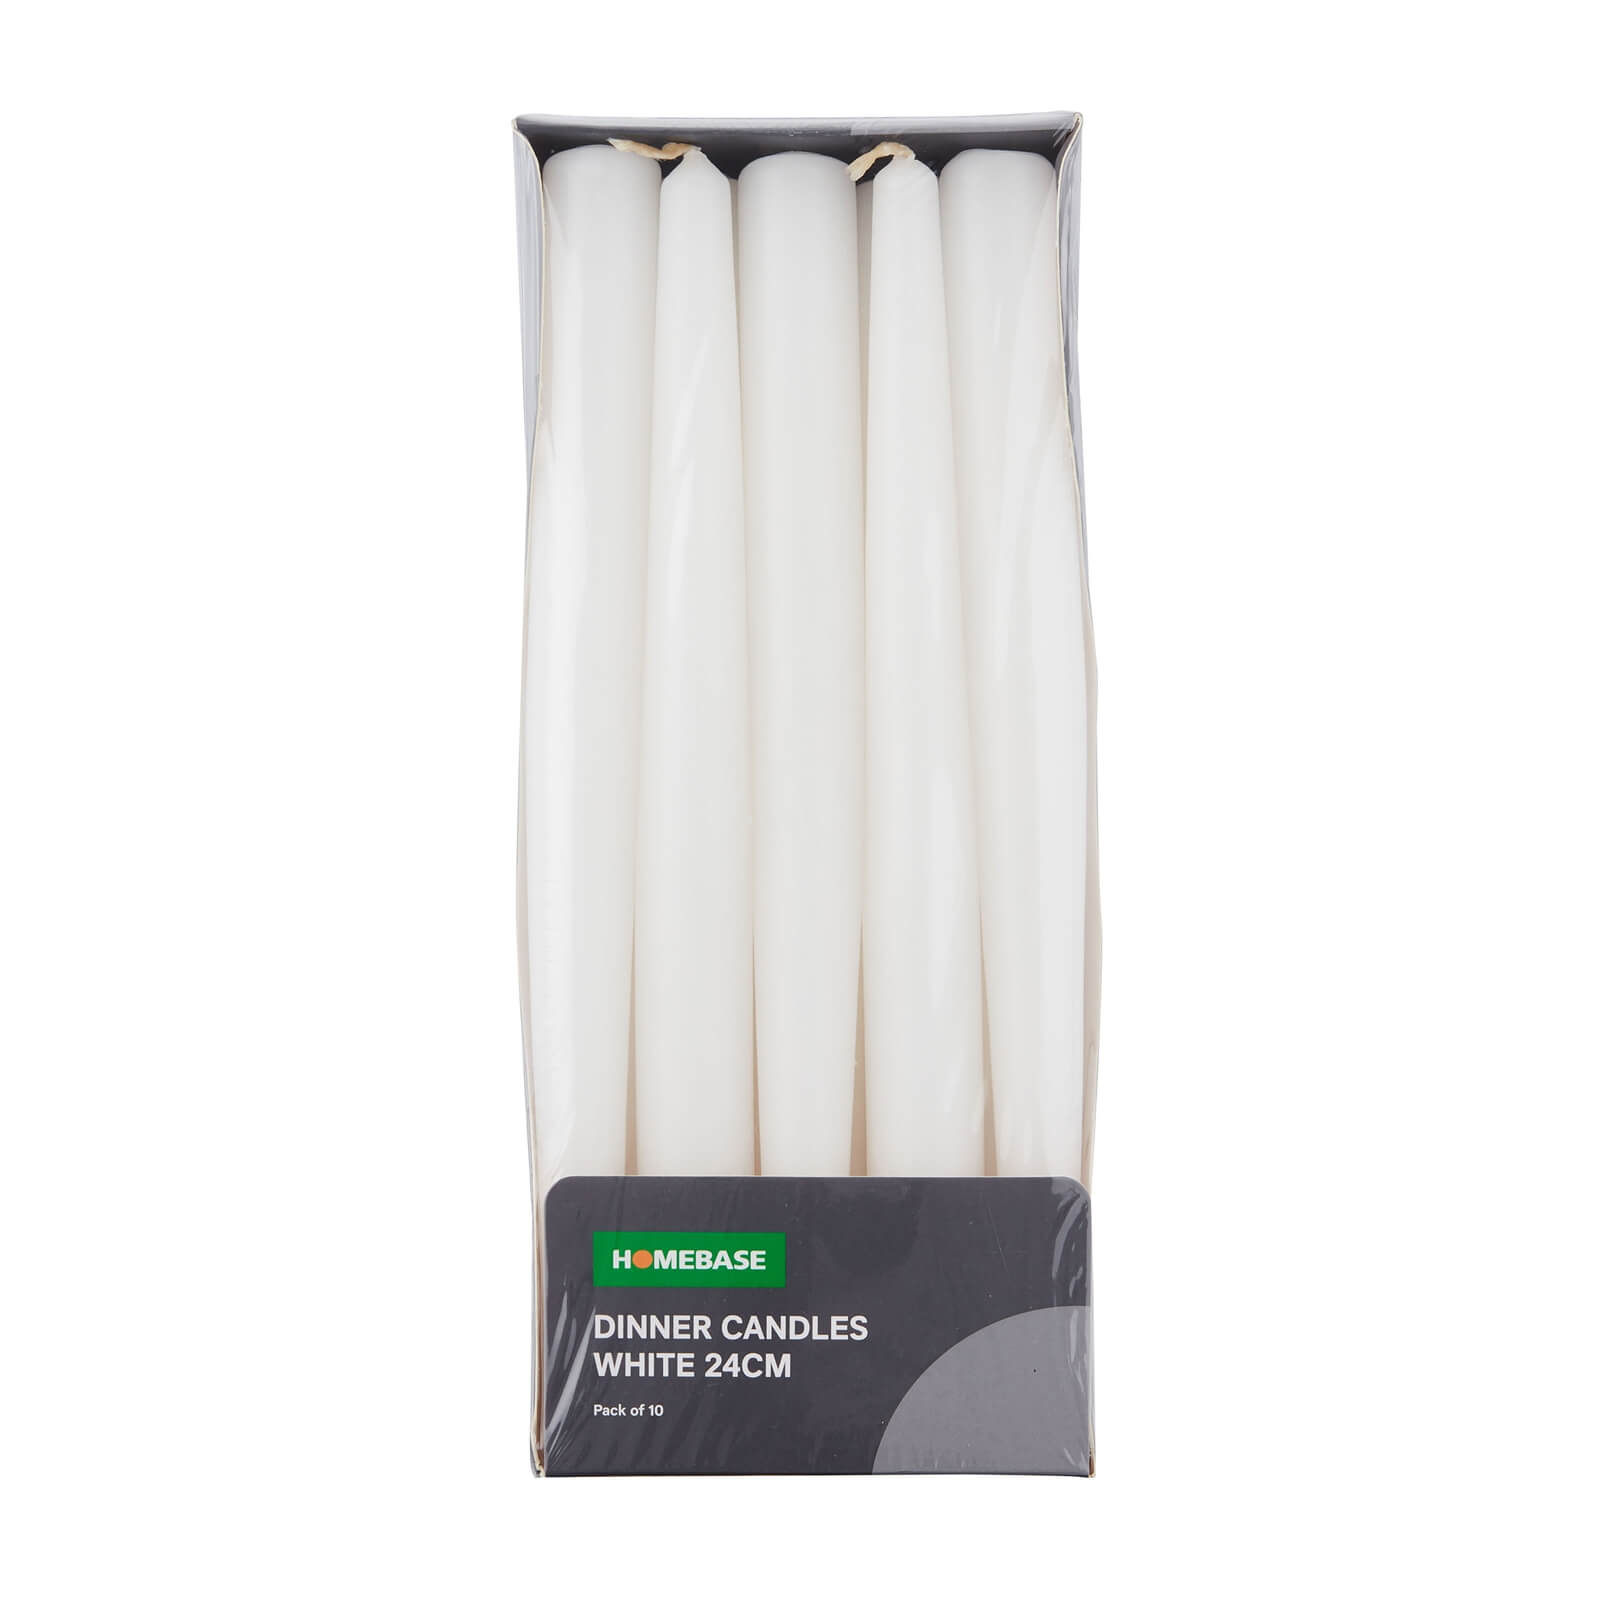 Photo of Pack Of 10 Dinner Candles - White - 24cm